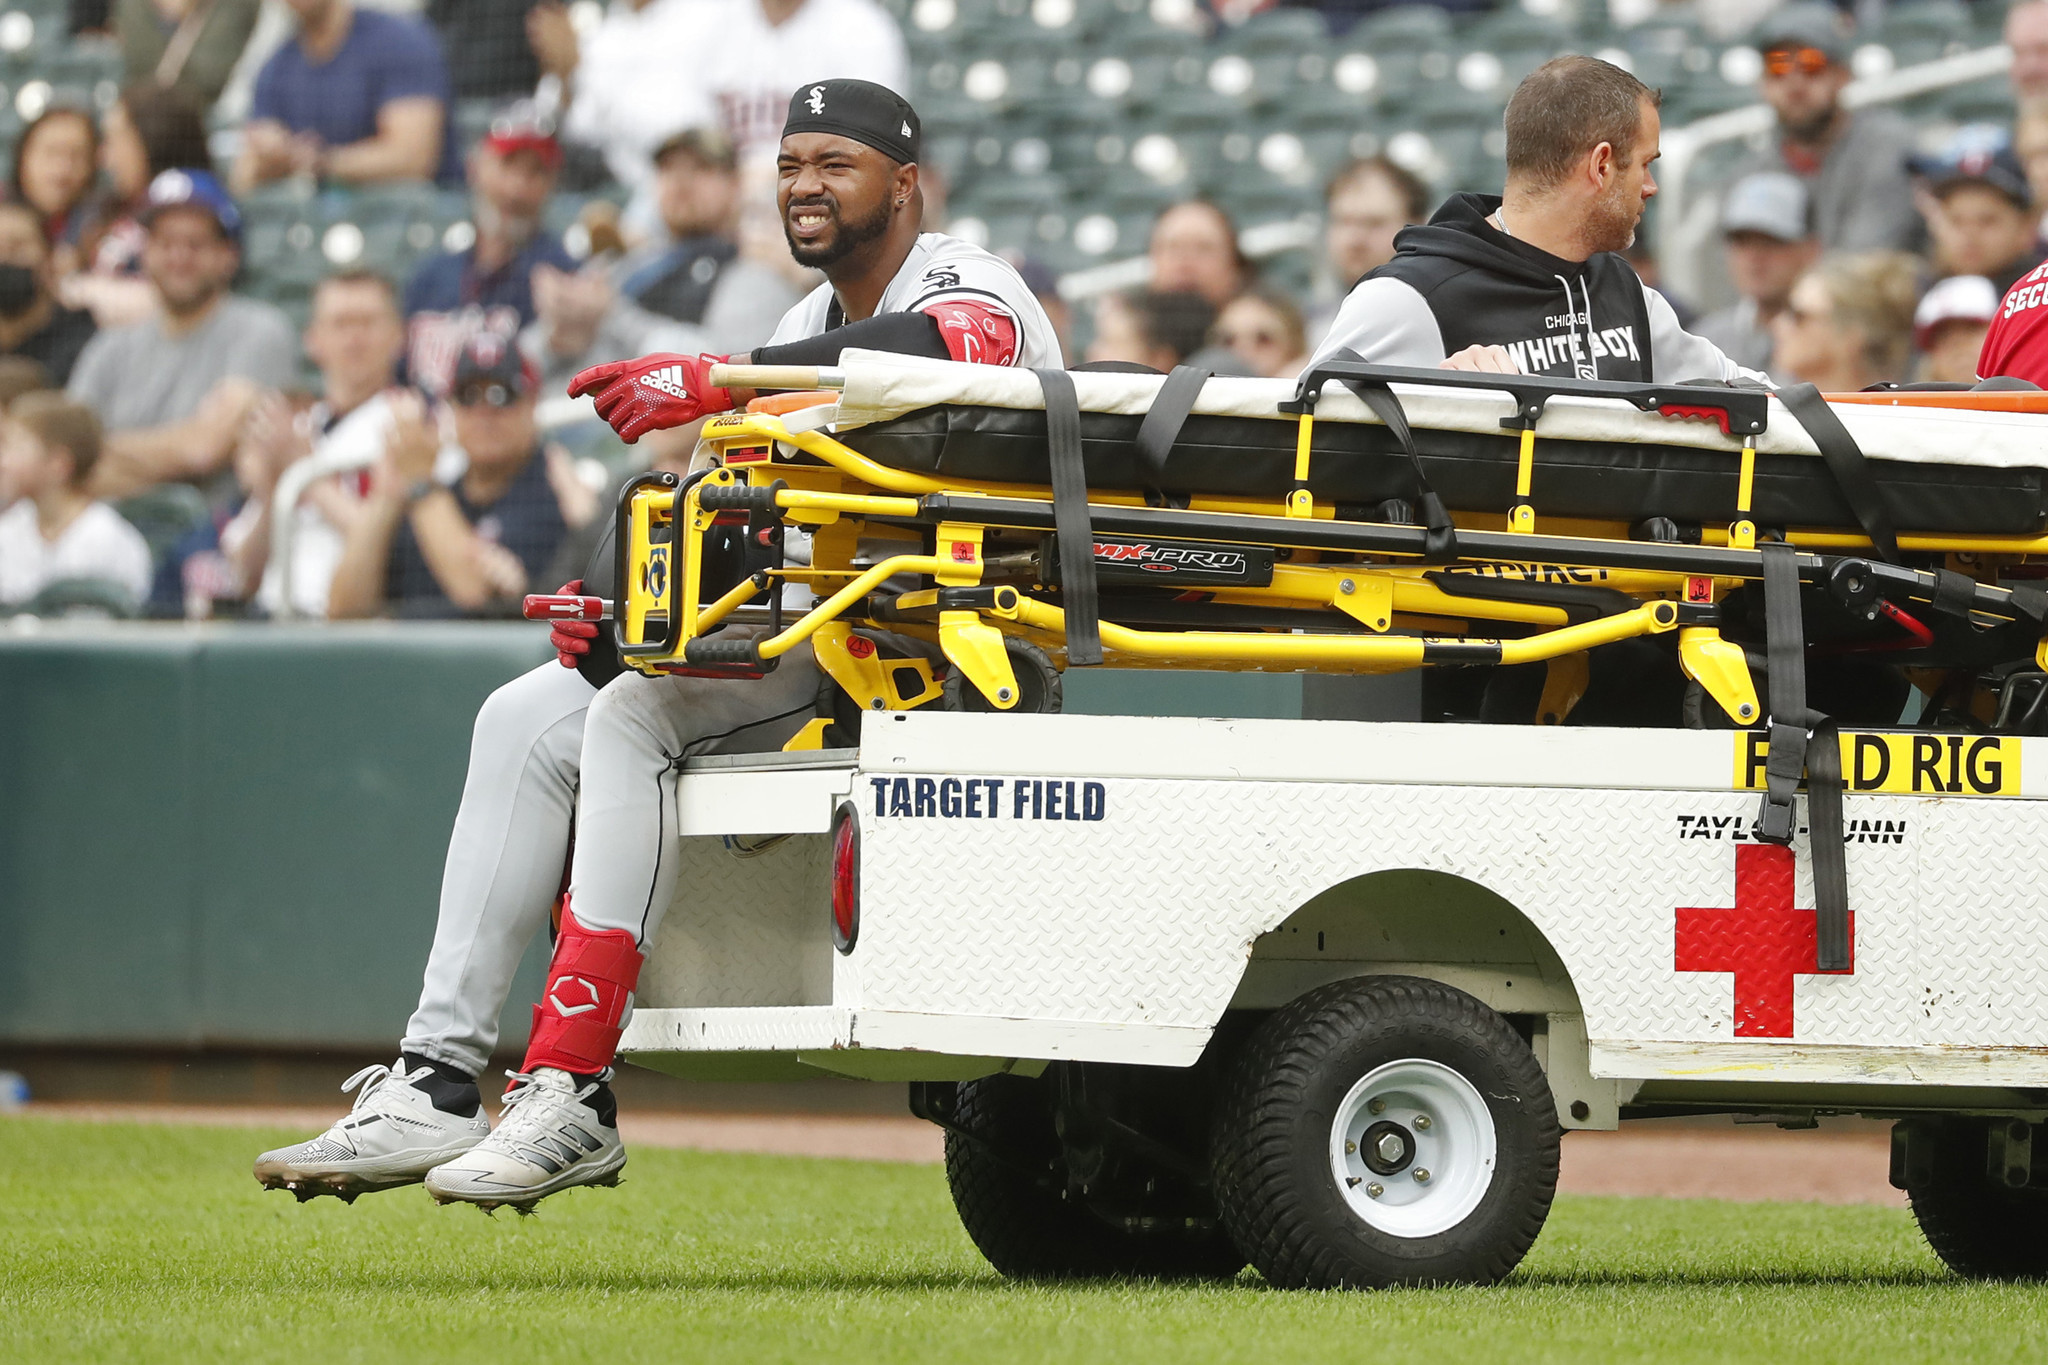 White Sox dealing with minor injuries to major players in Eloy